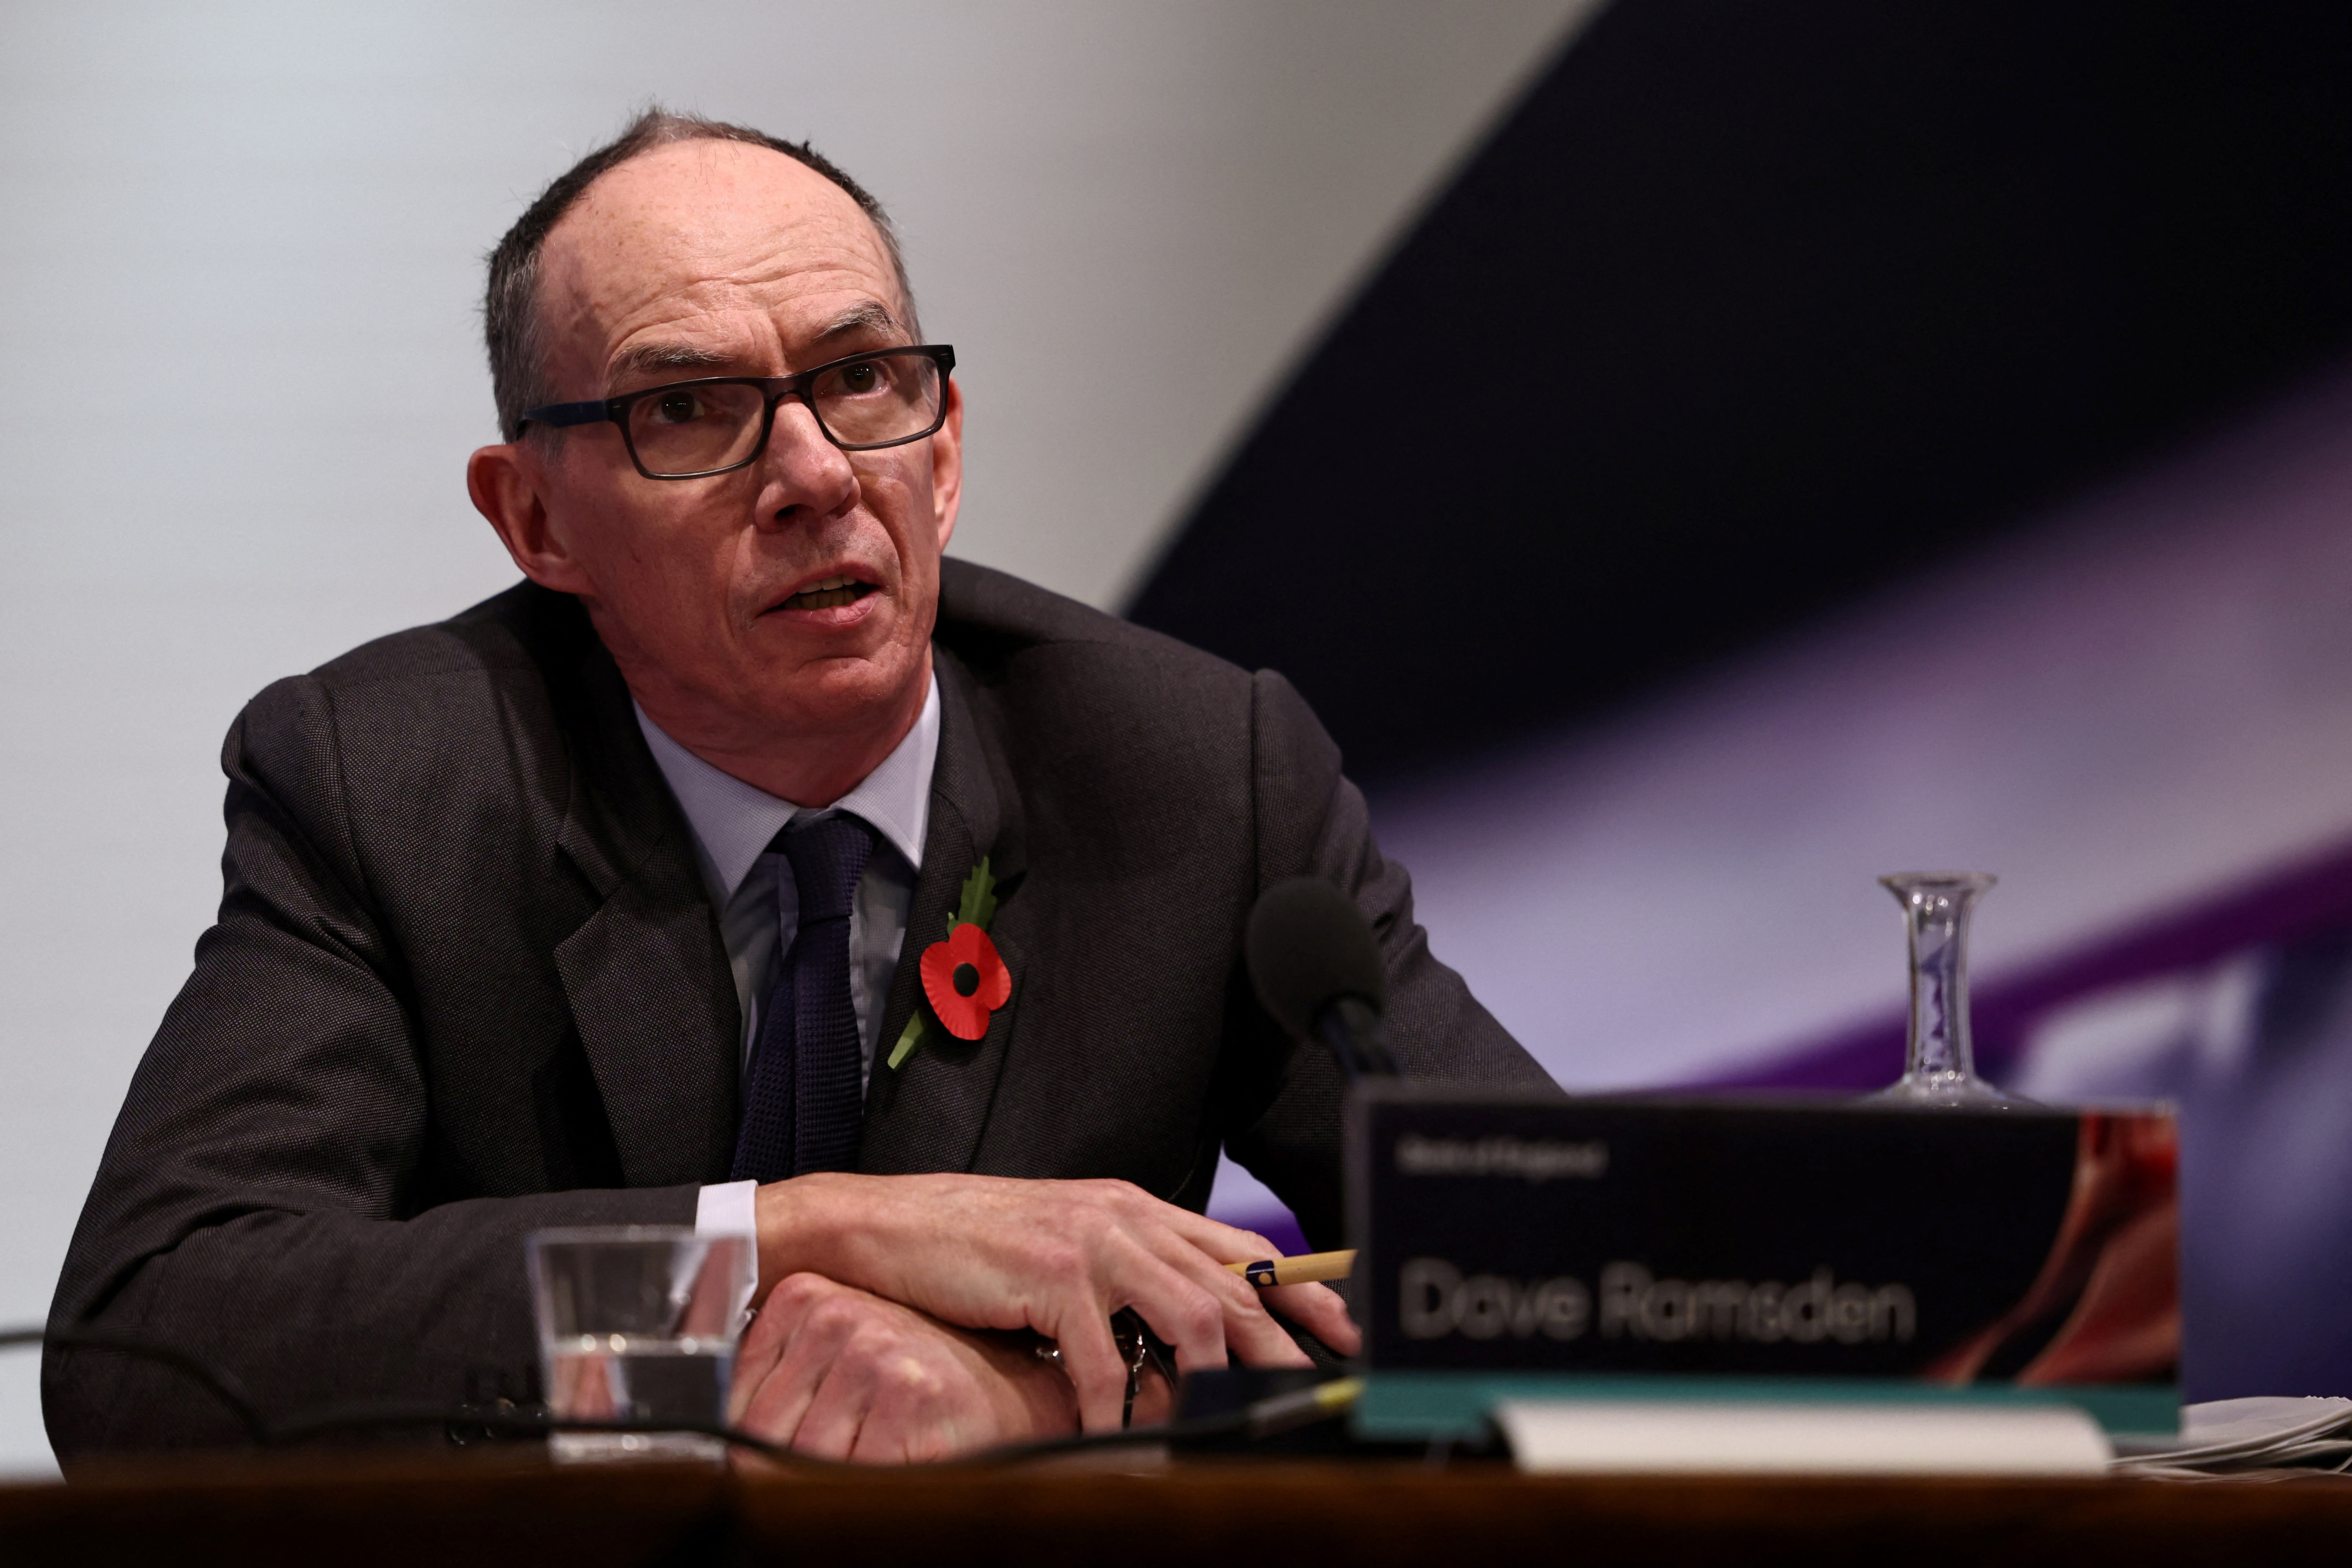 Deputy Governor for Markets and Banking of the Bank of England Dave Ramsden attends a press conference in London